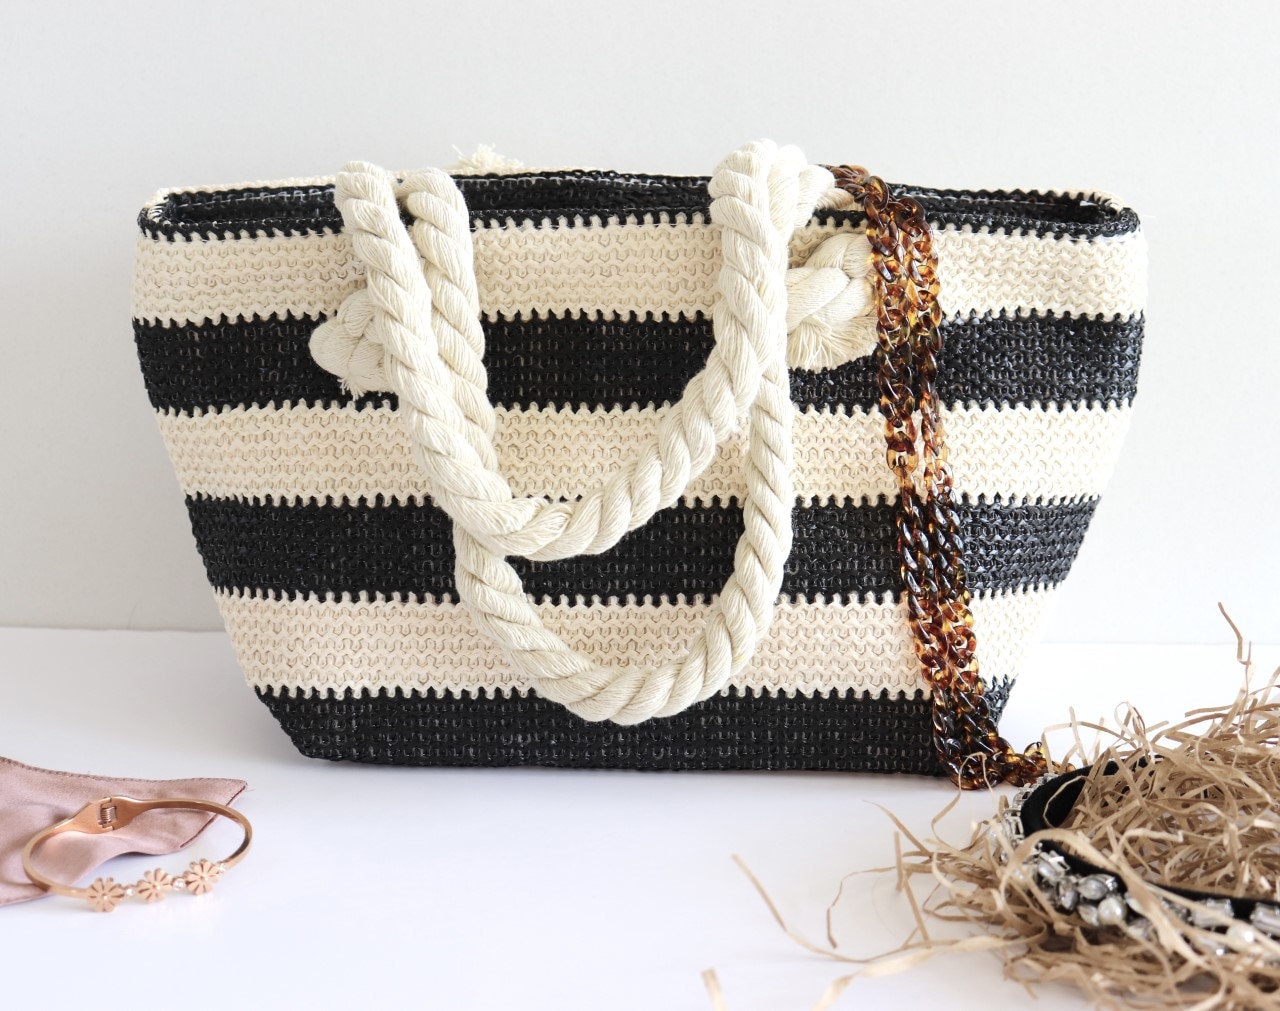 Handmade Woven Bag With Beige, Black & White Vertical Stripes, Women's Straw  Bag, Large Capacity Beach Tote Handbag For Summer Vacation Travel